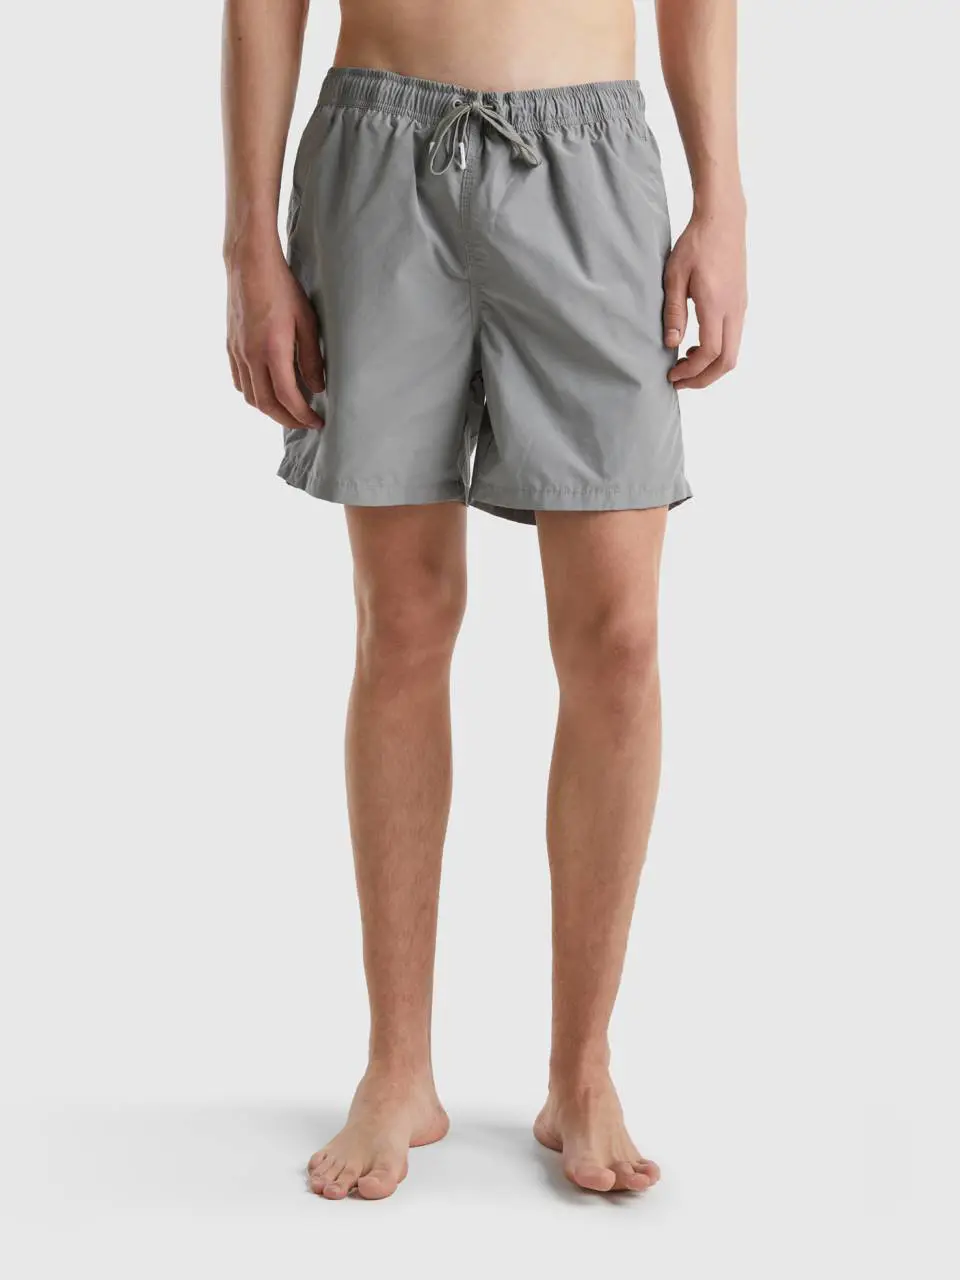 Benetton swim trunks in recycled cotton blend. 1